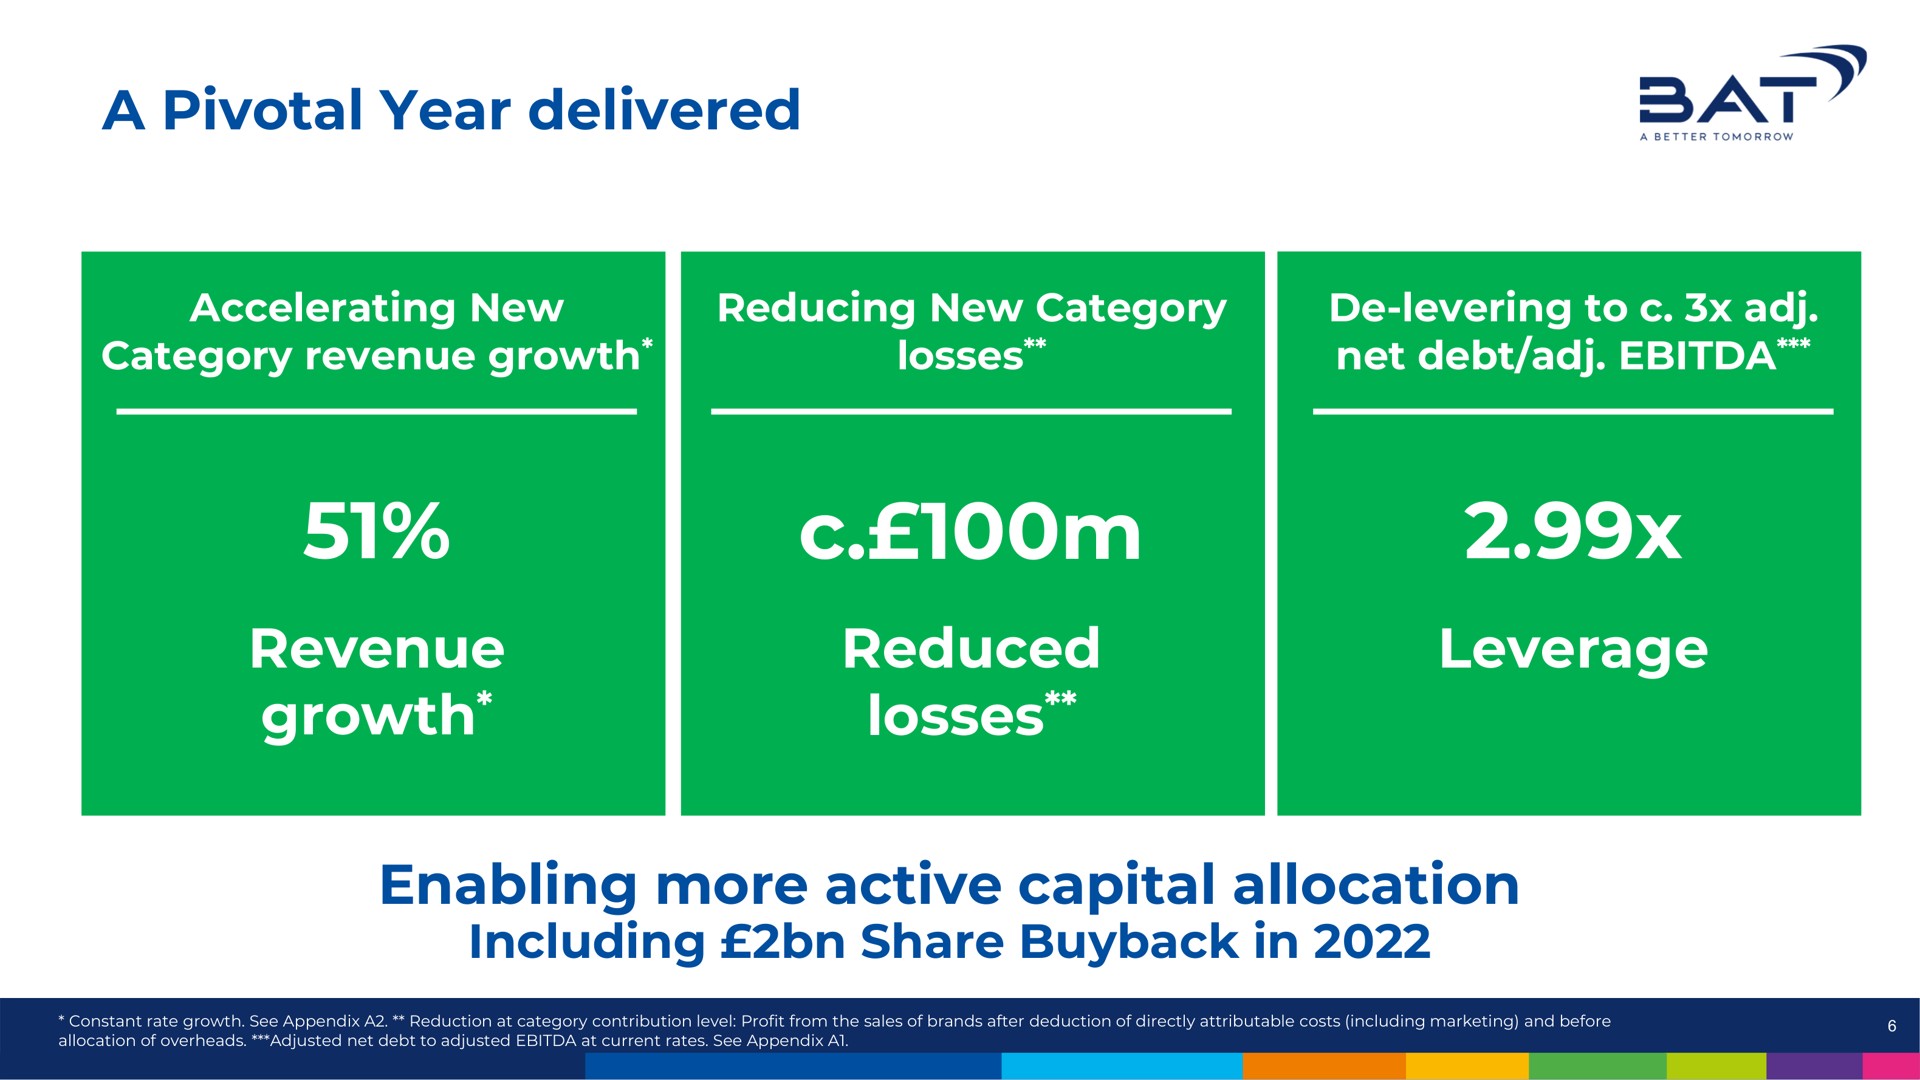 a pivotal year delivered revenue growth reduced losses leverage enabling more active capital allocation | BAT